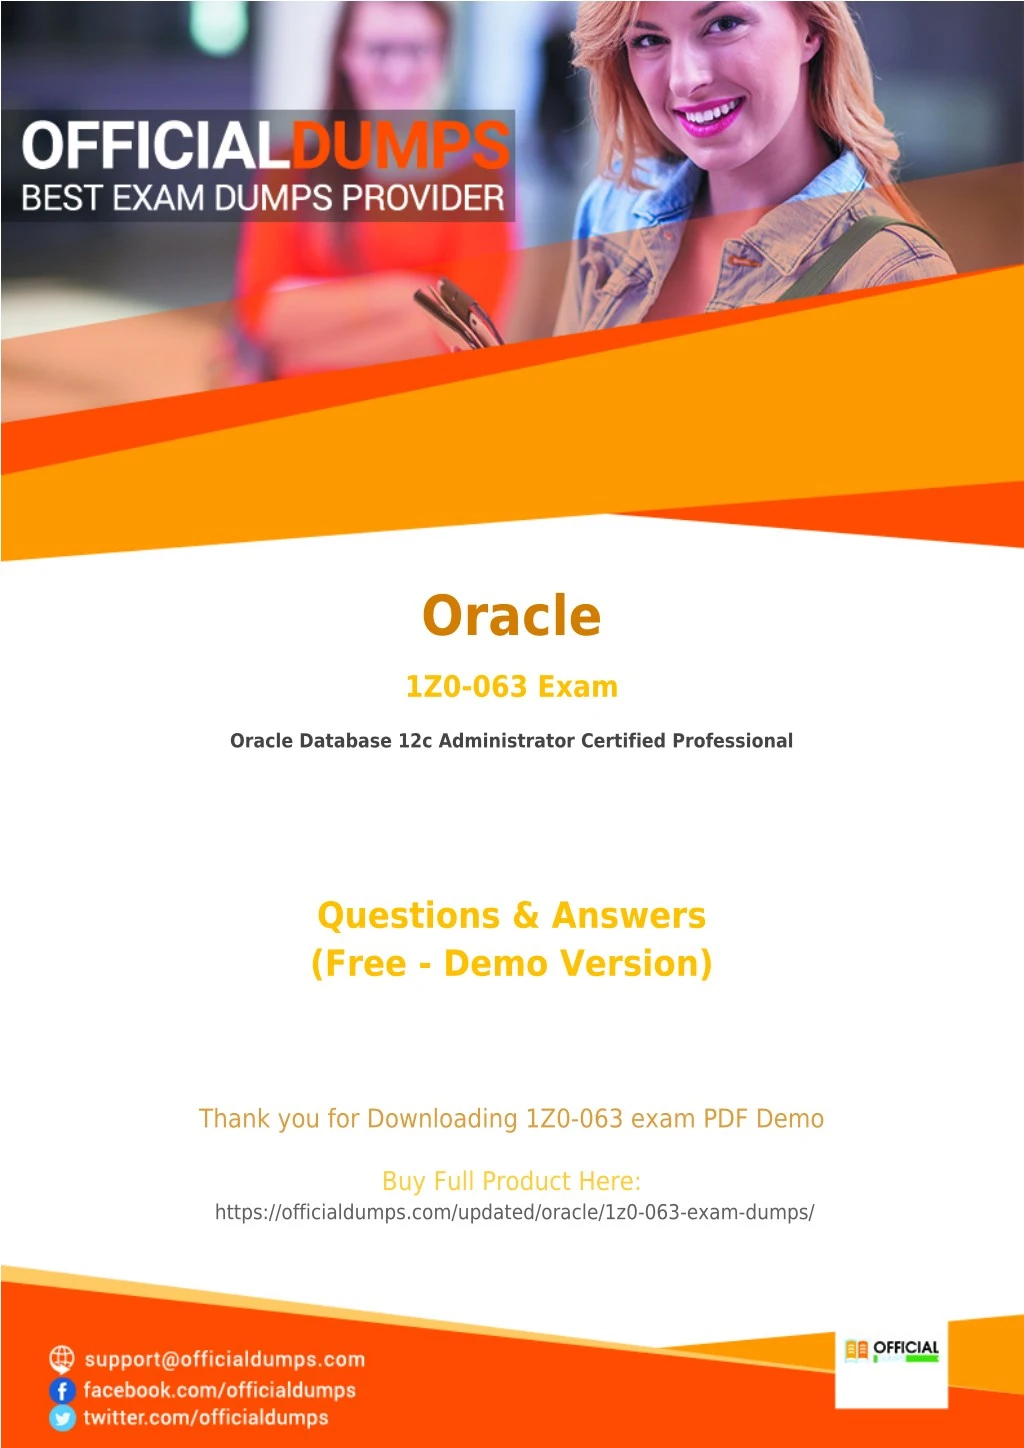 Ppt 1z0 063 Learn Through Valid Oracle 1z0 063 Exam Dumps Real 1z0 063 Exam Questions Powerpoint Presentation Id